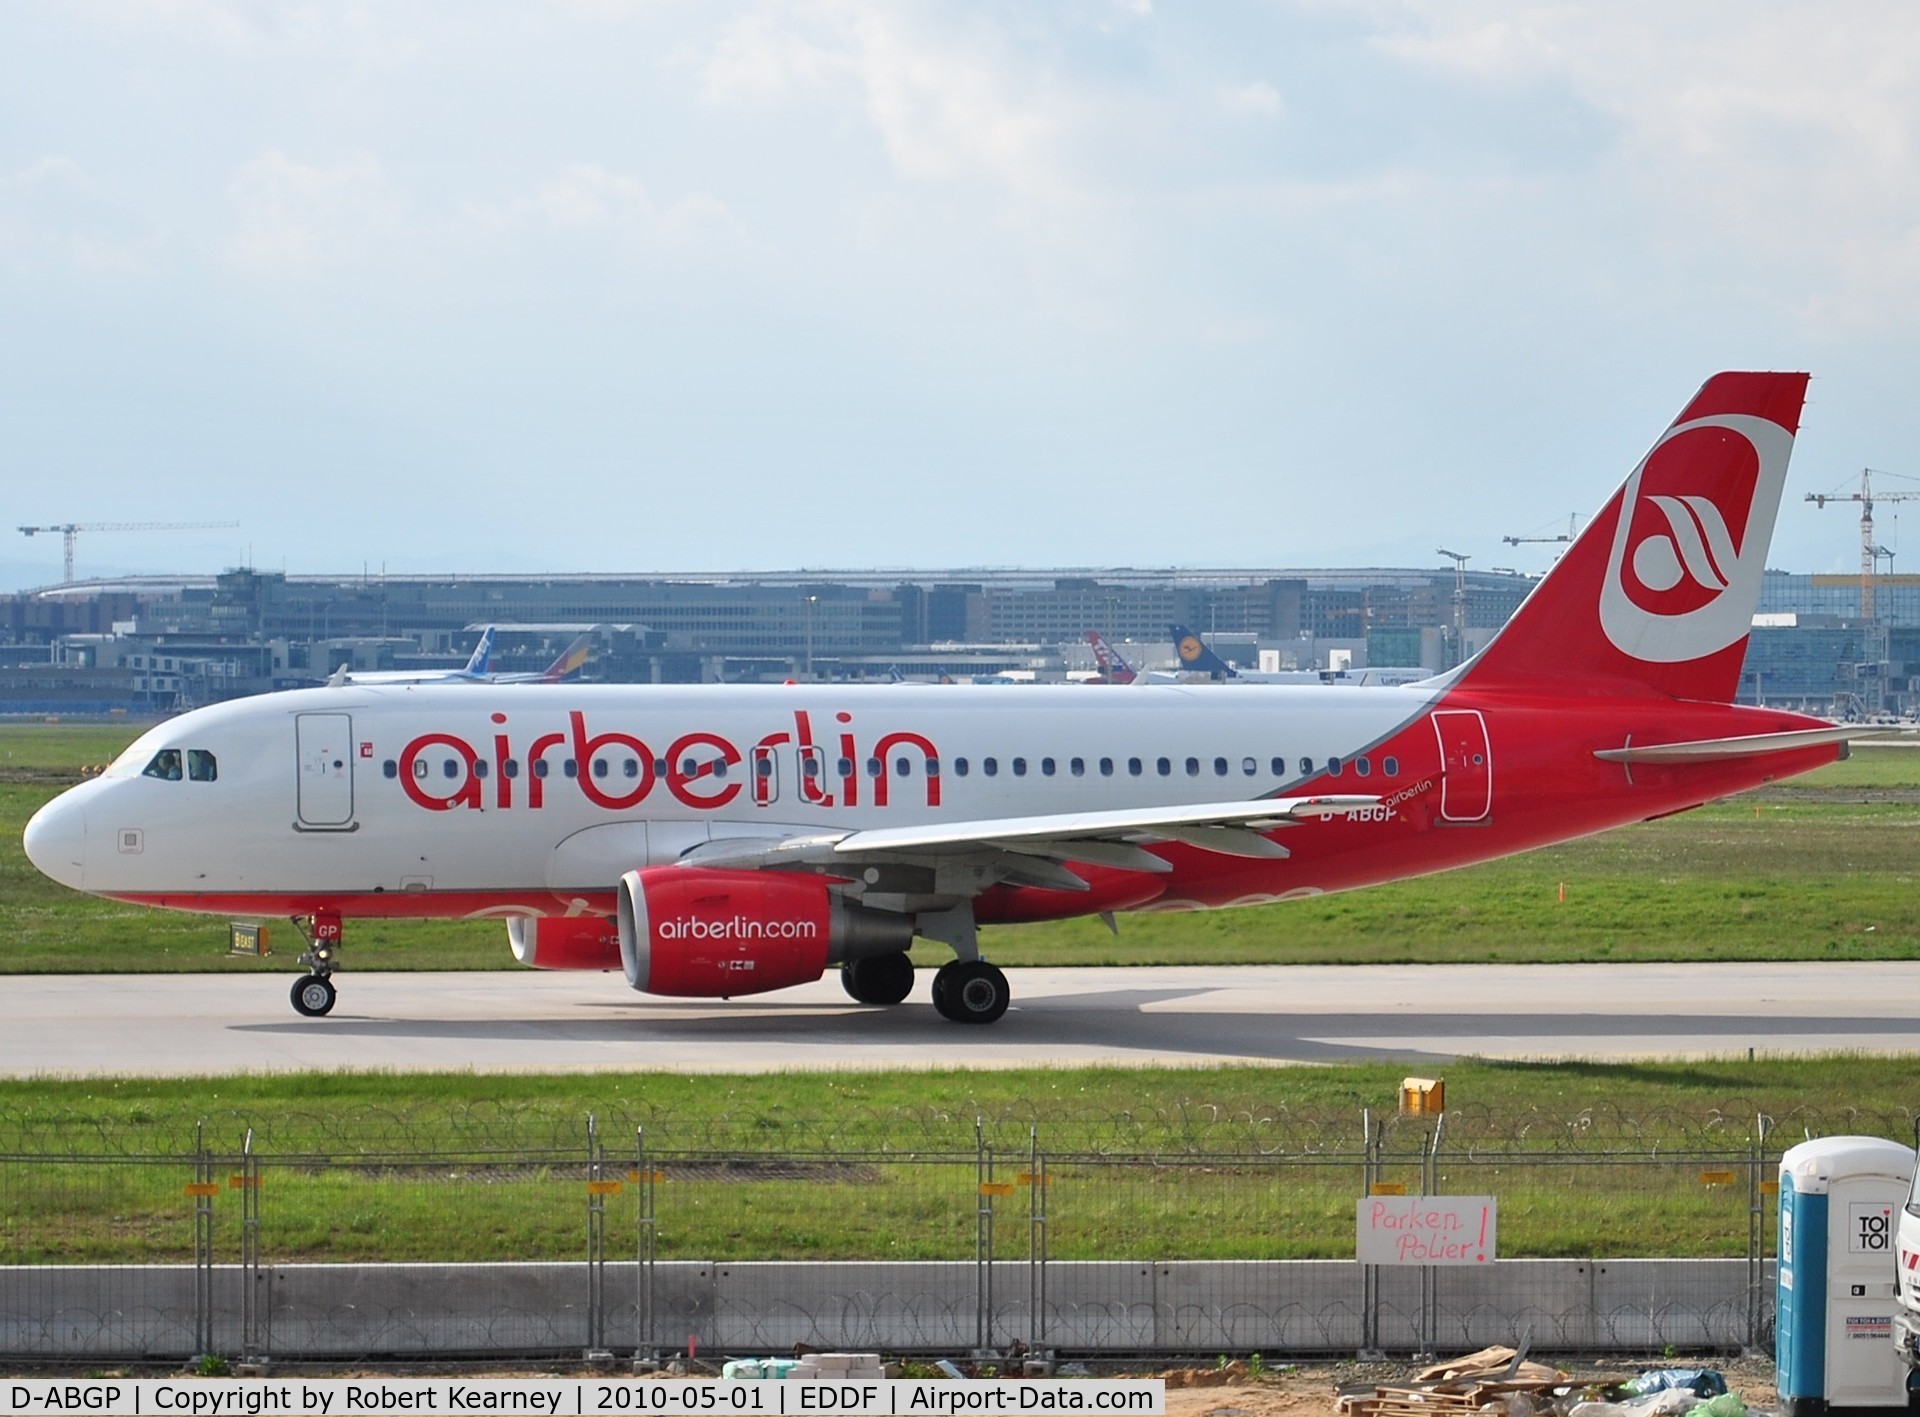 D-ABGP, 2008 Airbus A319-112 C/N 3728, Air Berlin on back taxiway